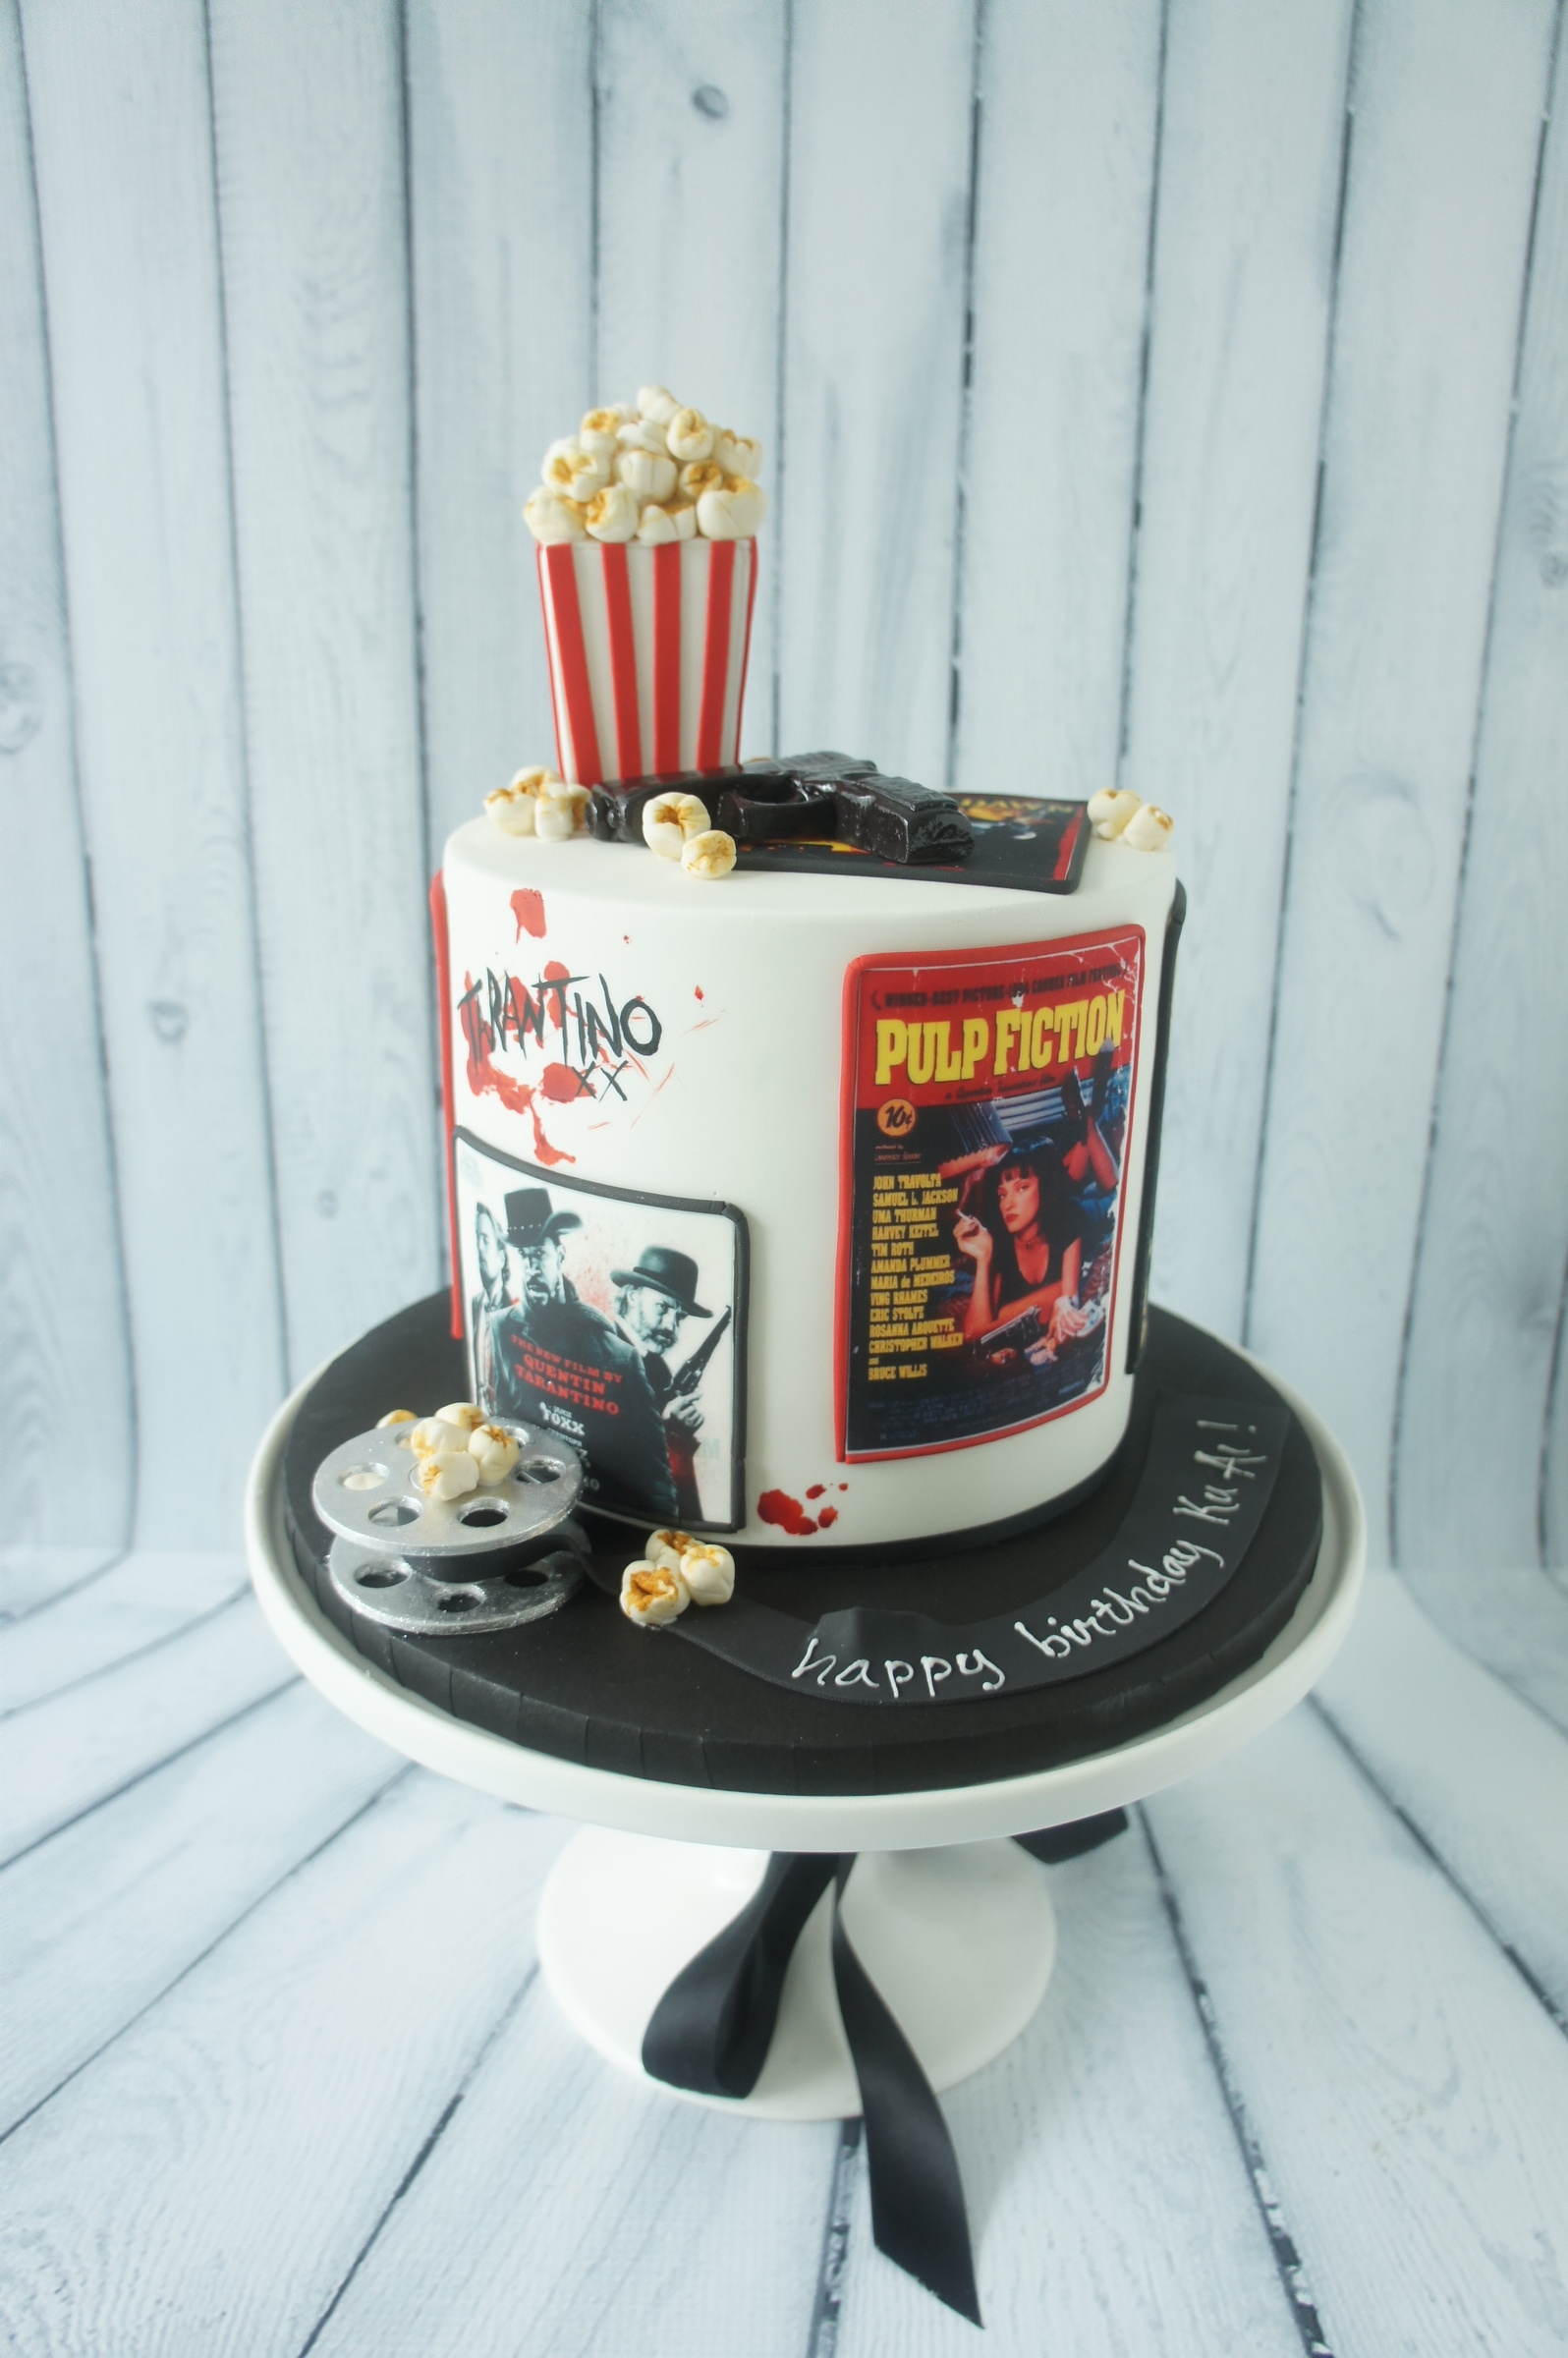 Film cake | A tribute to Quentin Tarantino and Robert Rodrig… | Flickr